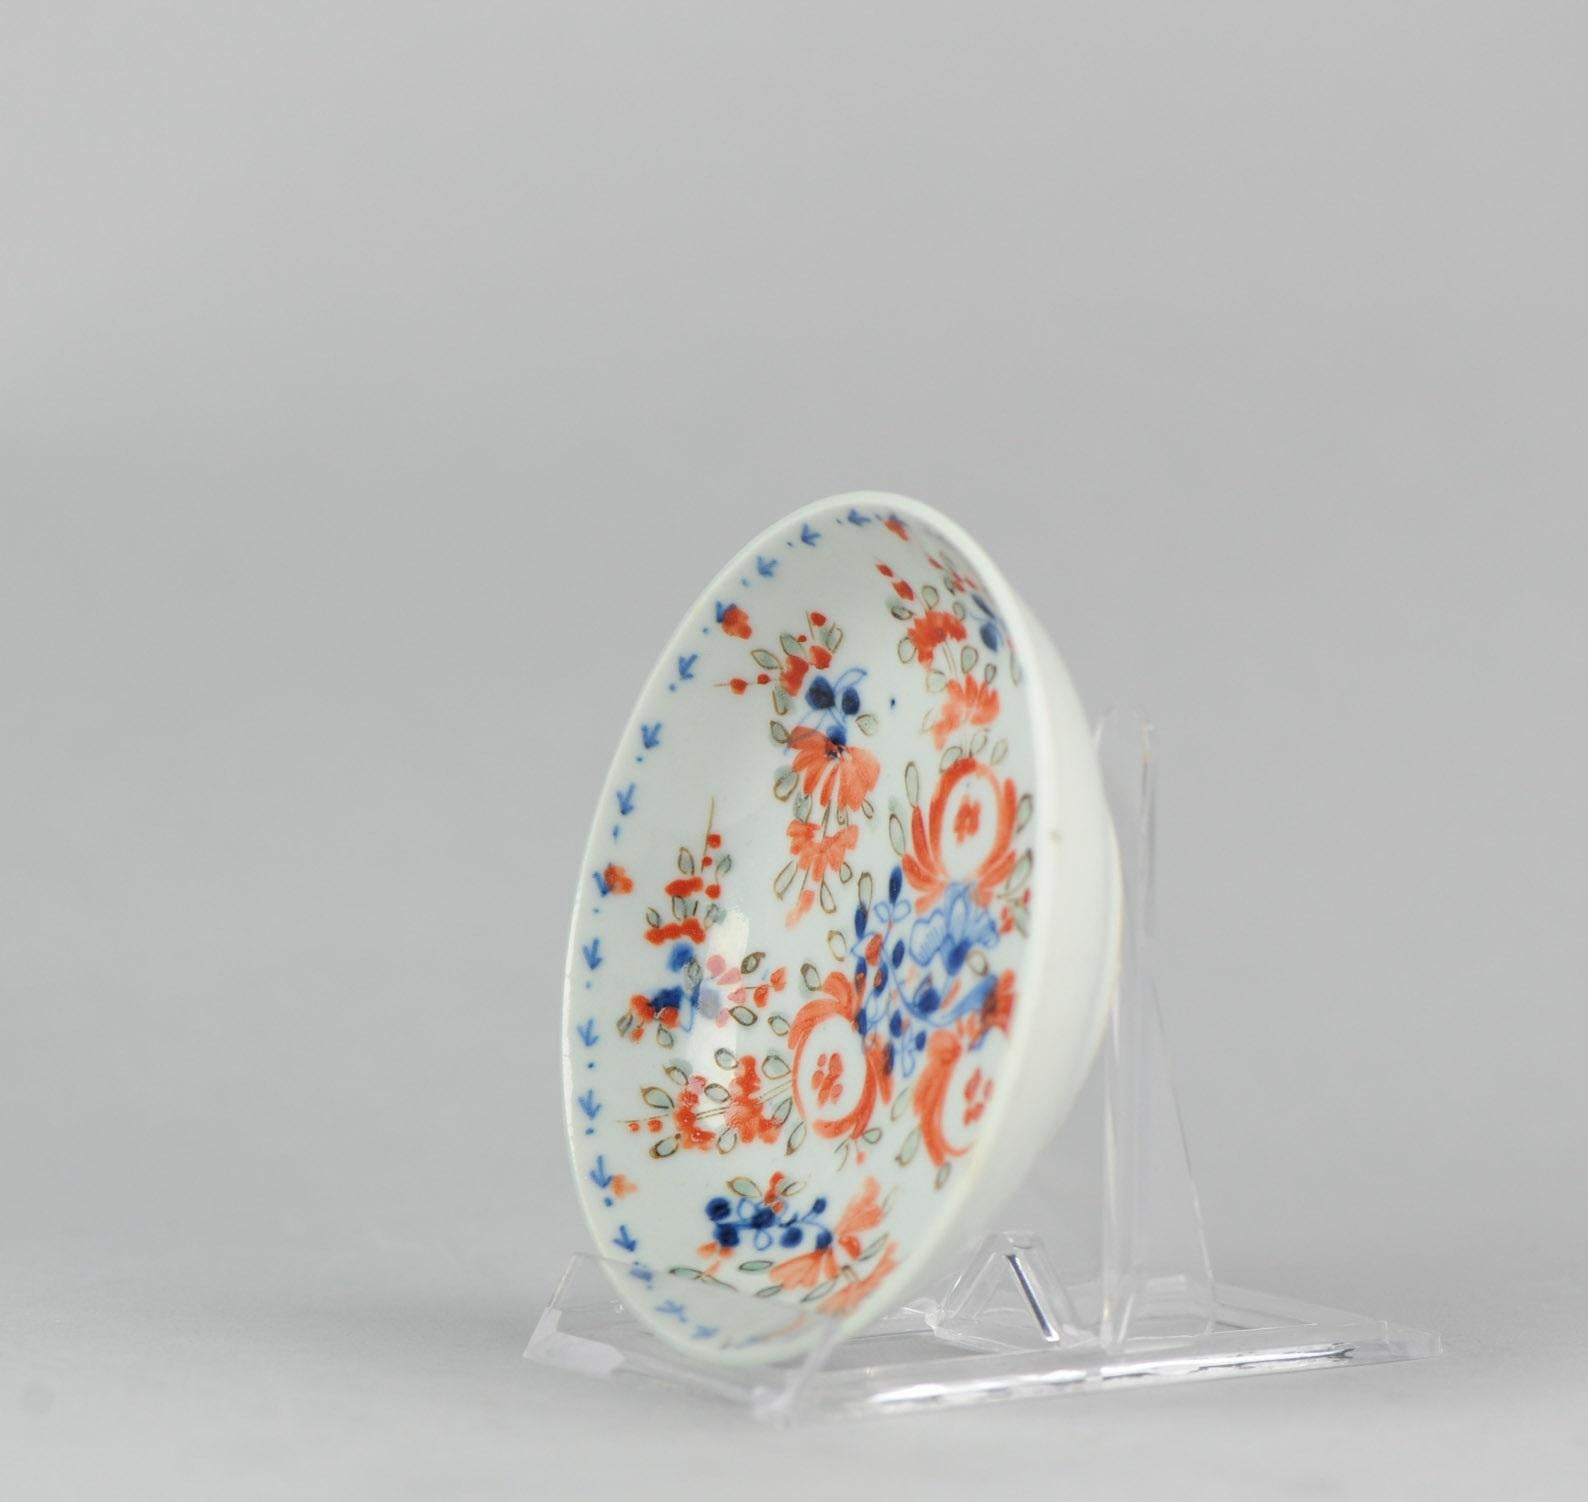 Antique Chinese Porcelain Famille Verte Dish Saucer Qing Period, 18th Century In Good Condition For Sale In Amsterdam, Noord Holland